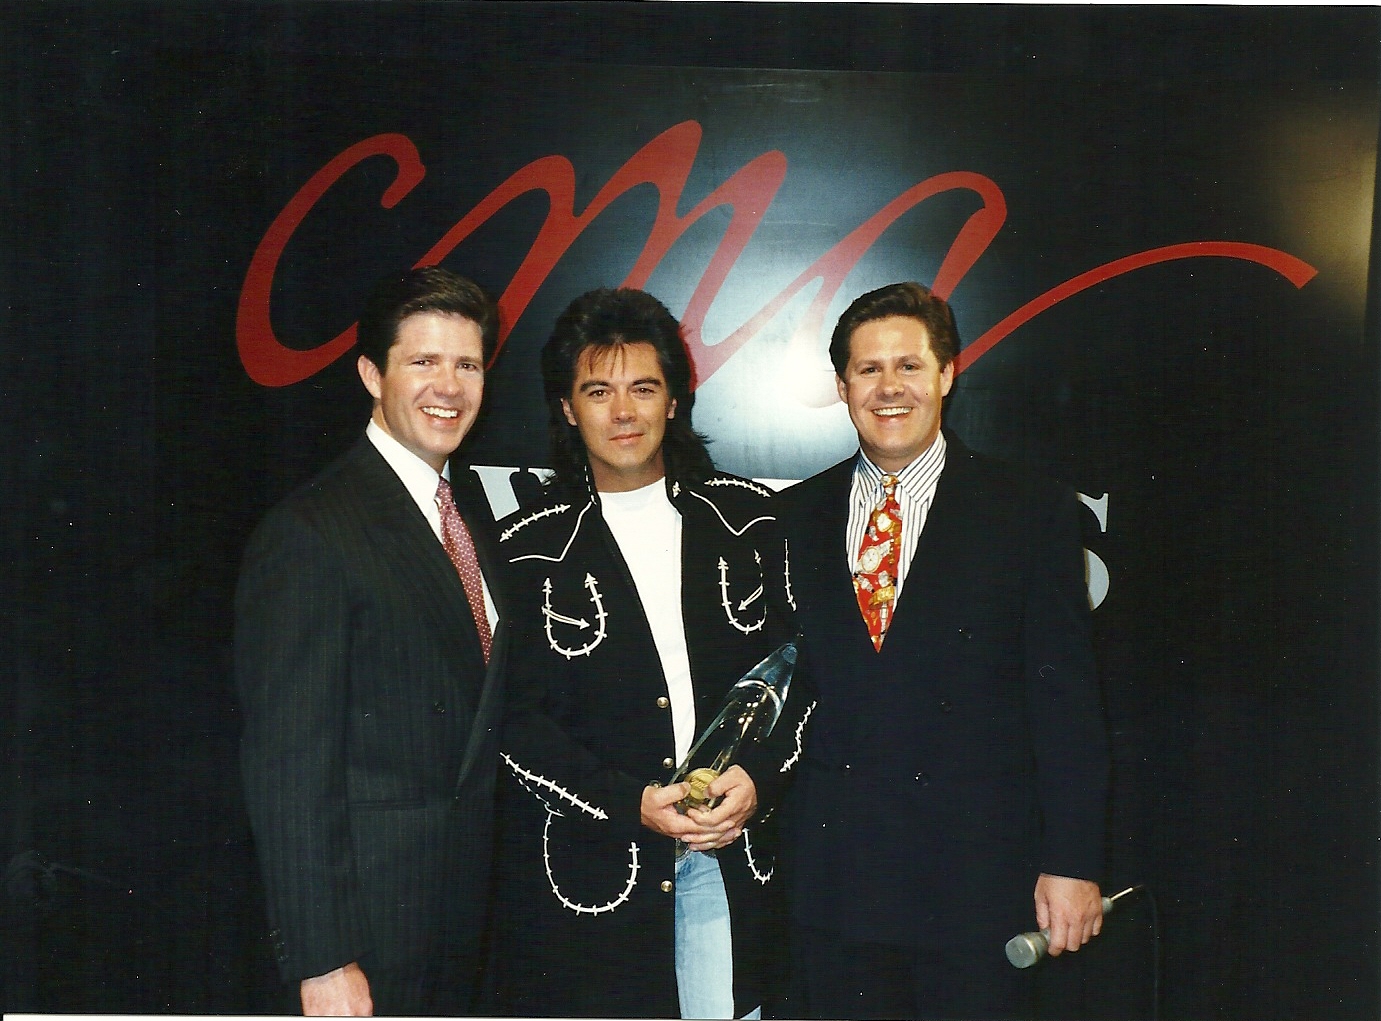 The McCain Brothers with Marty Stuart.